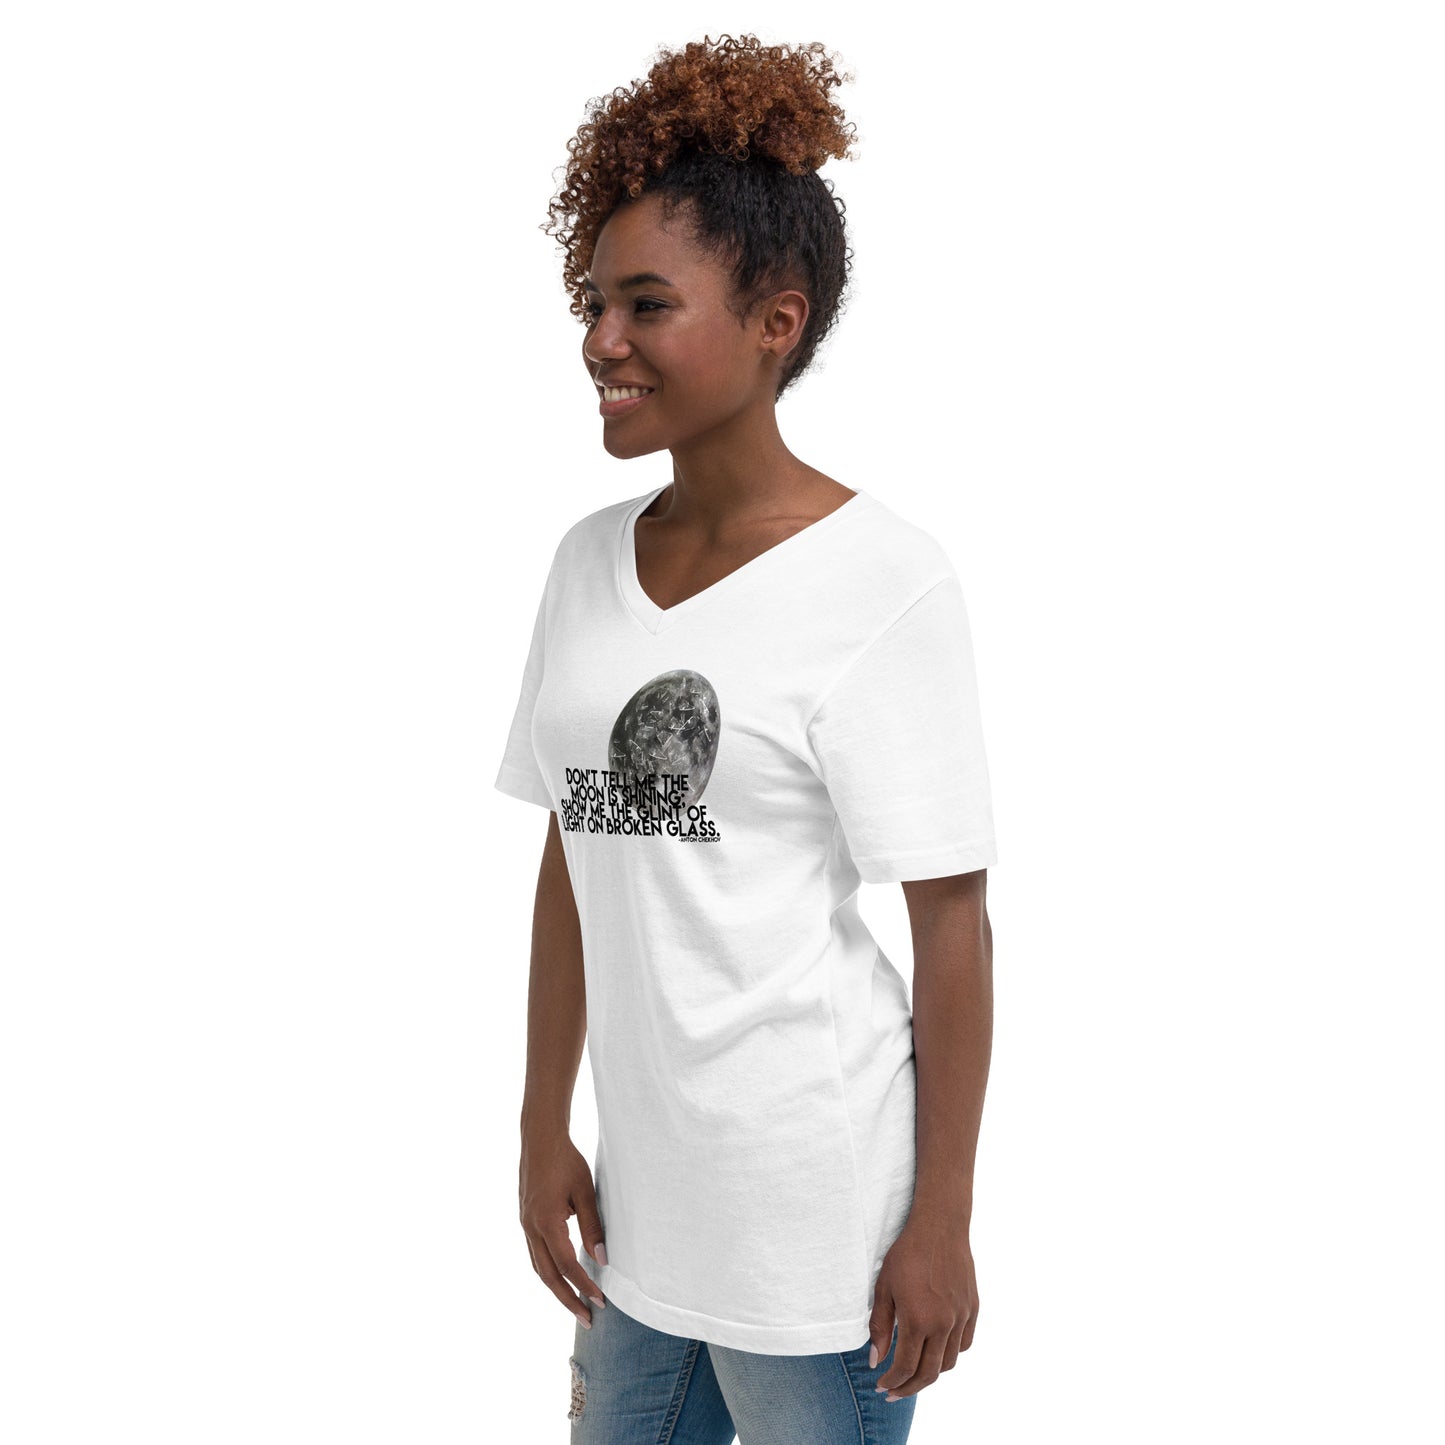 Don't Tell Me The Moon Is Shining: Show Me To Glint Of Light On Broken Glass Unisex V-Neck